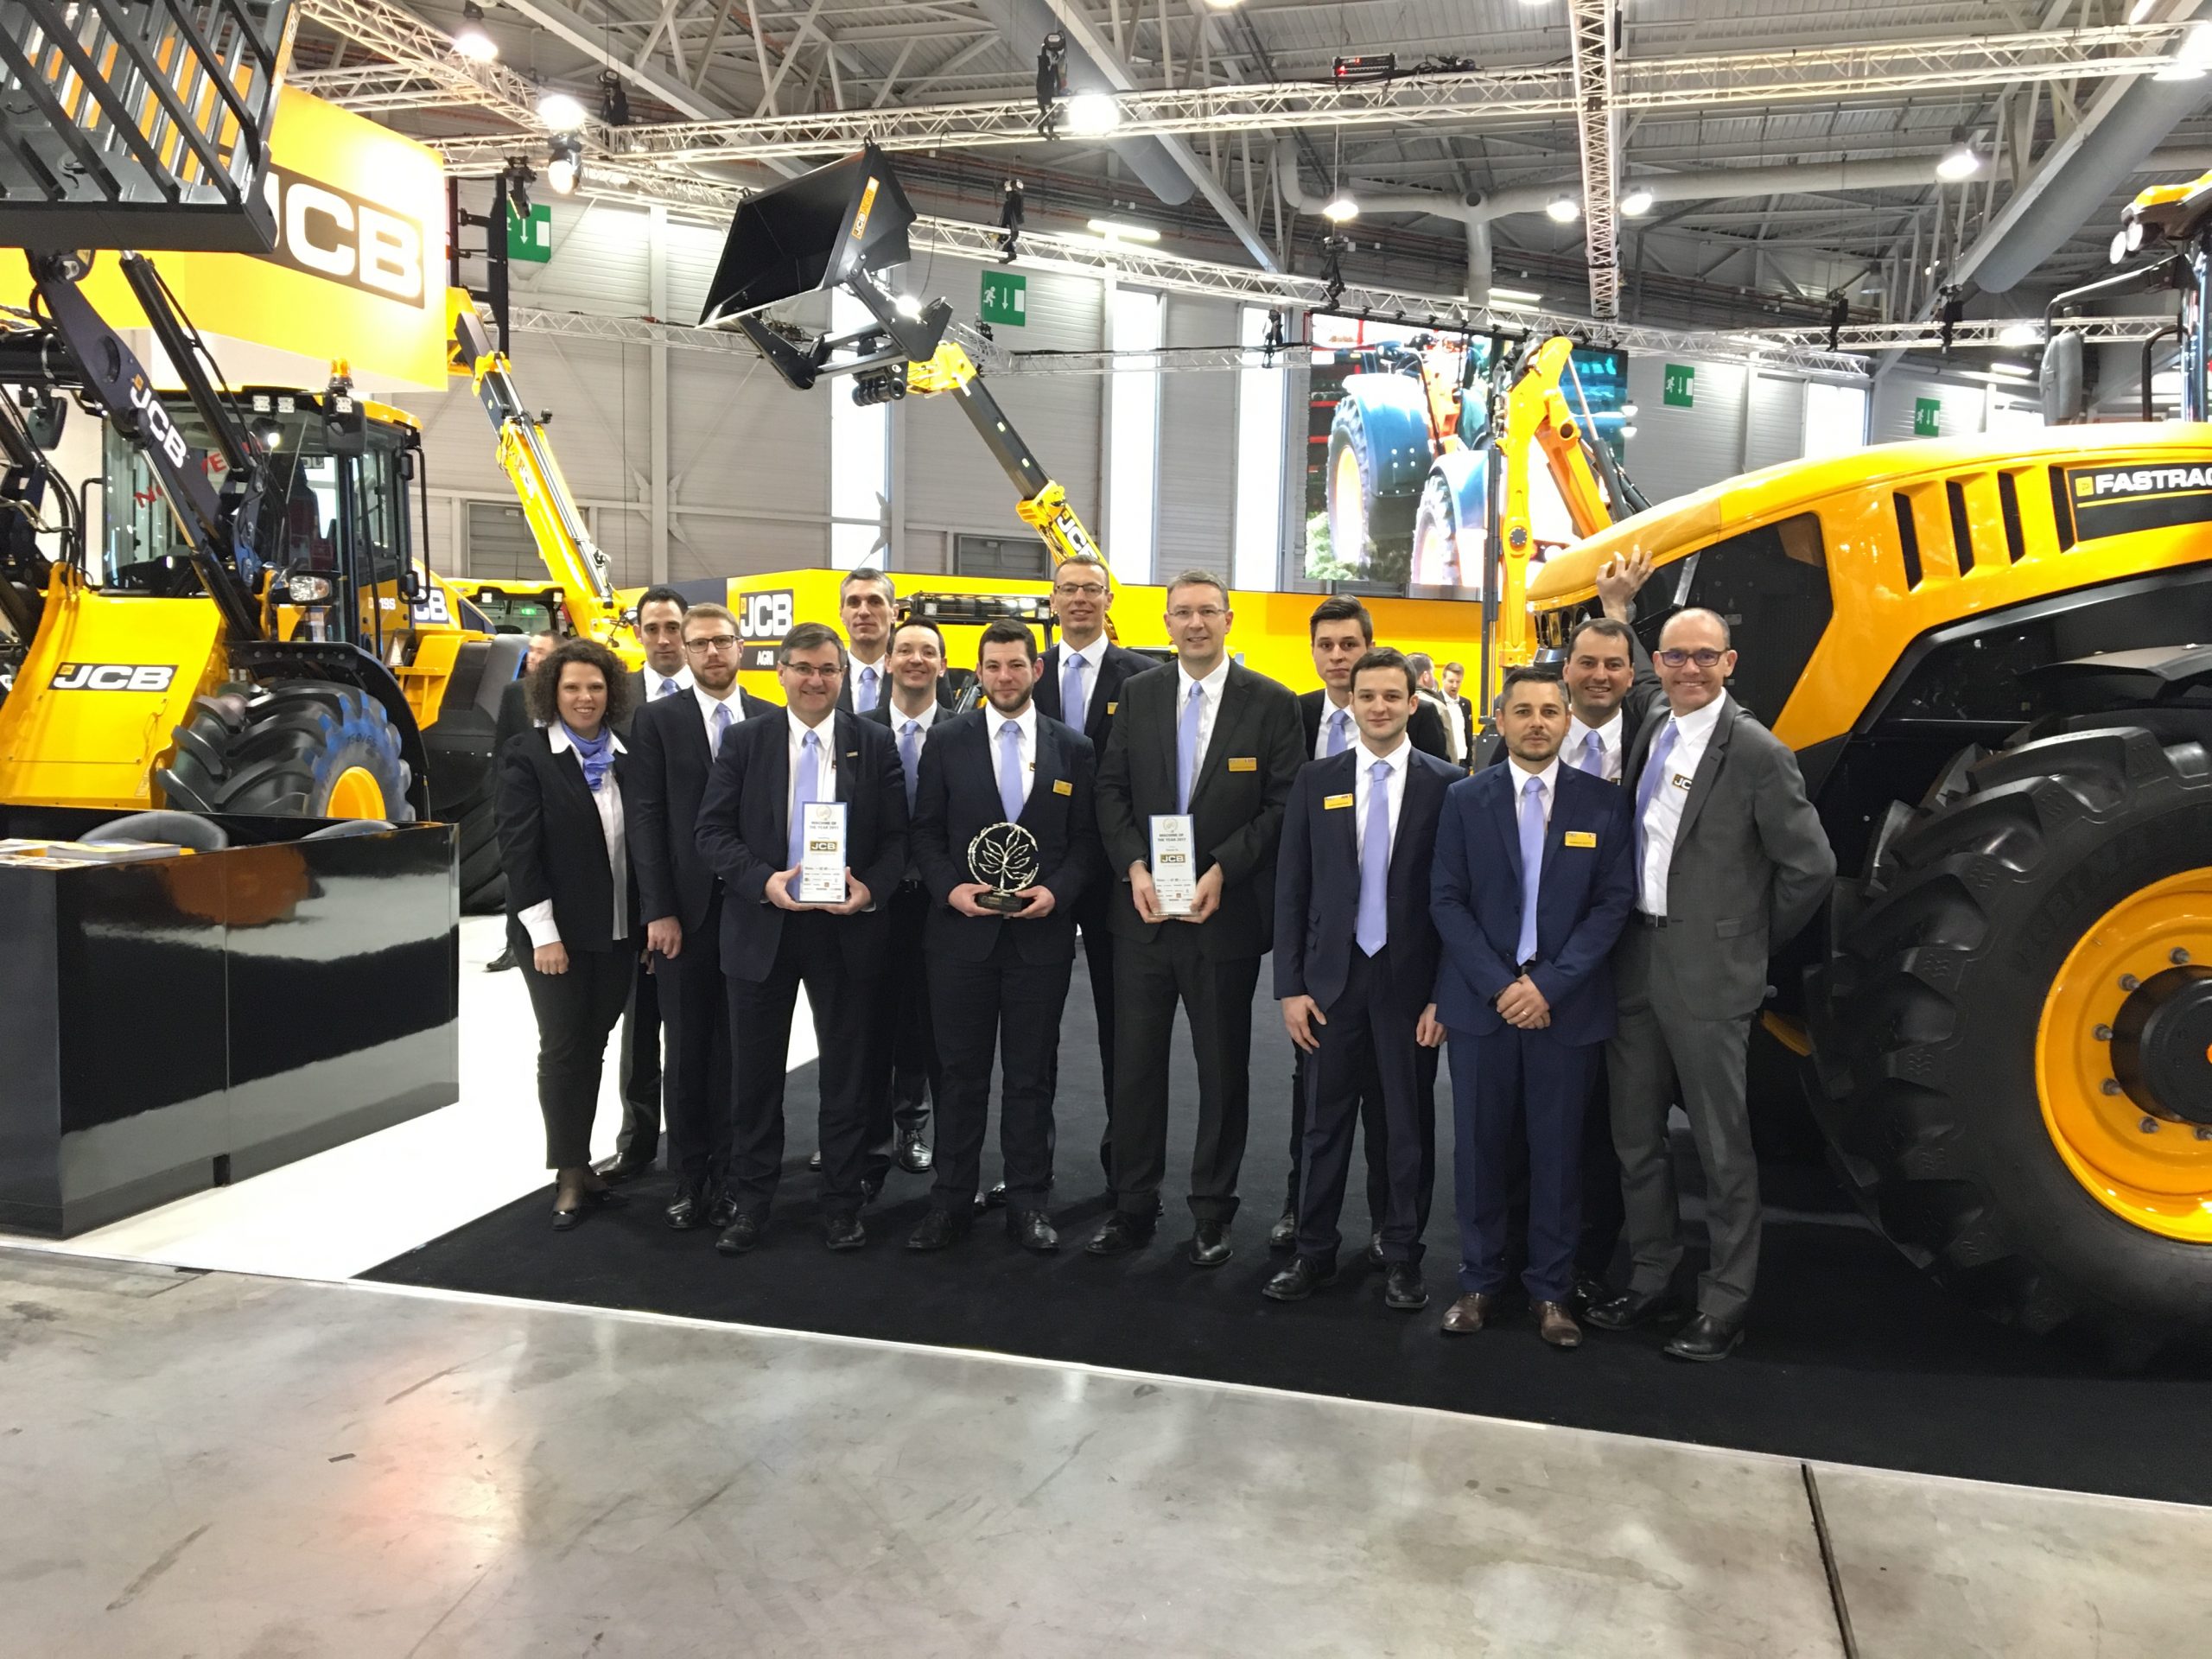 JCB DUO ARE SIMA 2017 MACHINES OF THE YEAR